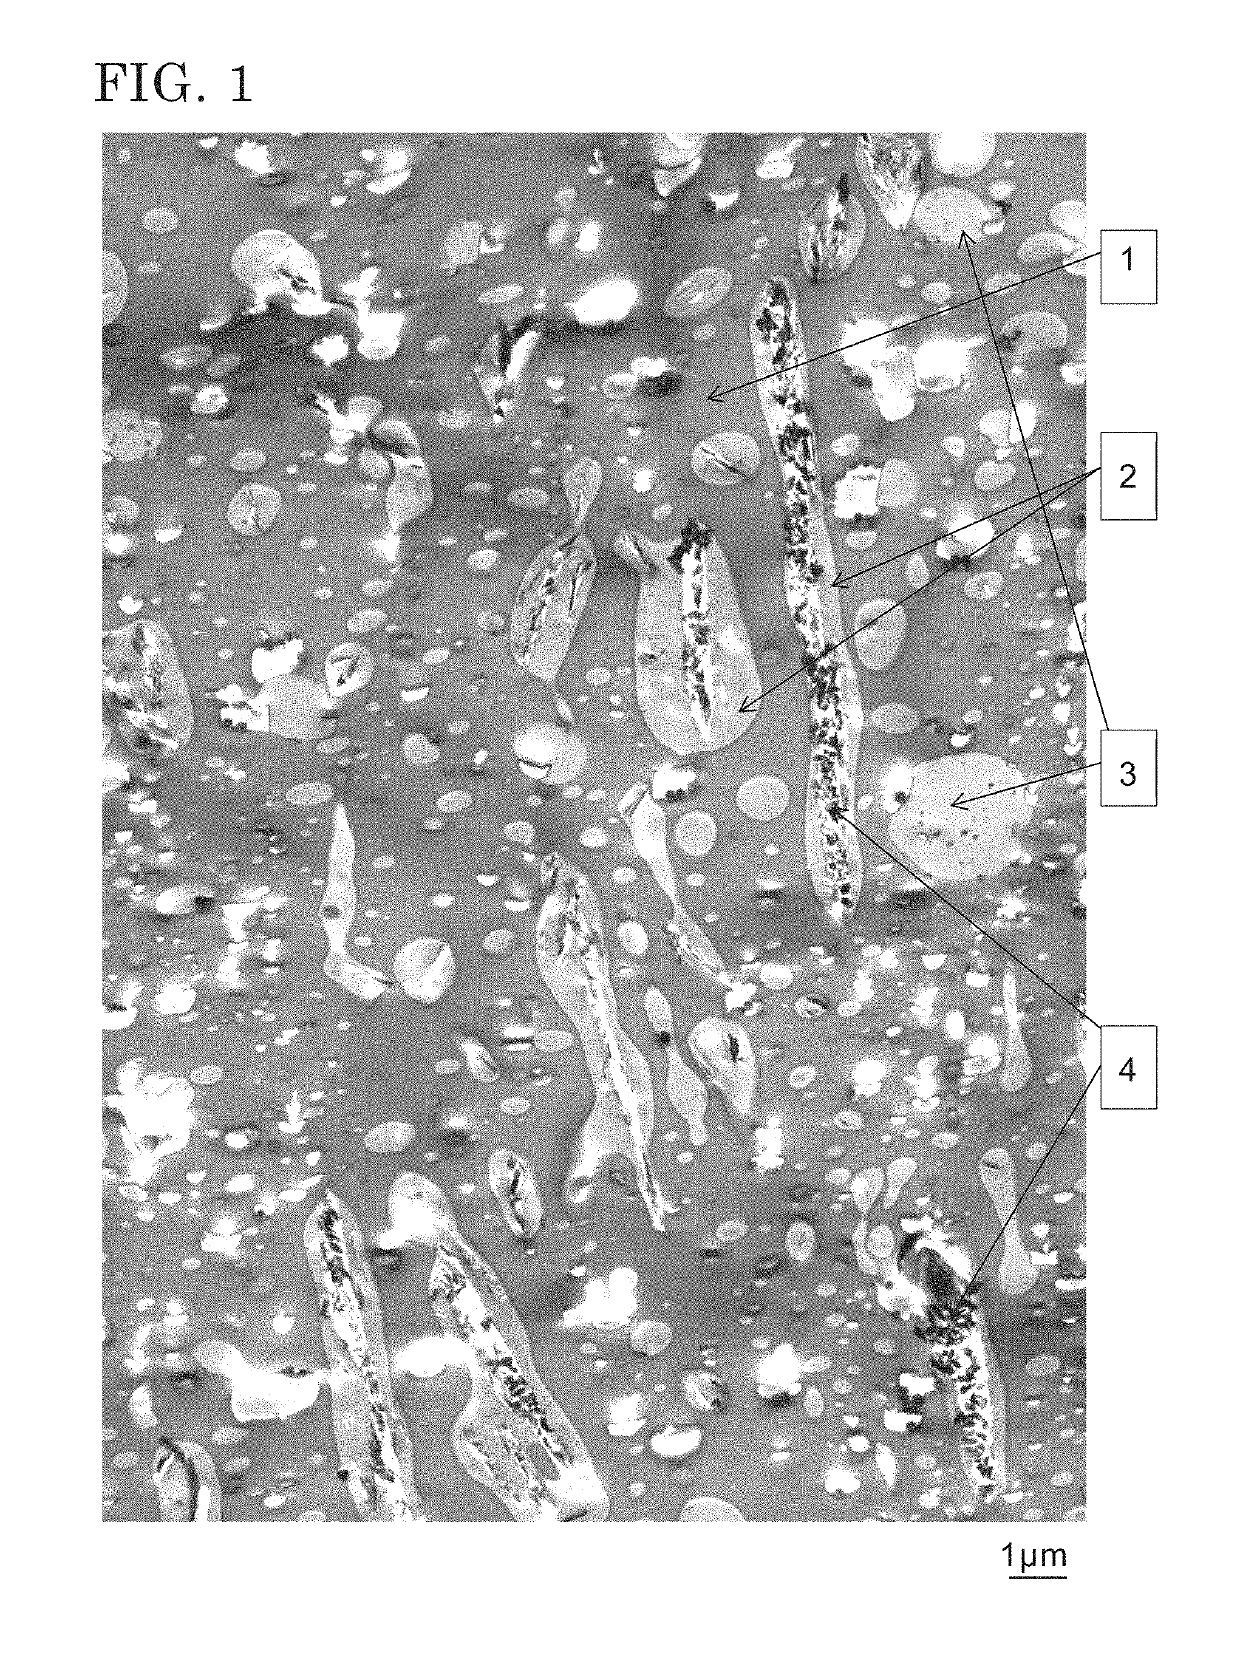 Polycarbonate resin composition having excellent thermal decomposition resistance